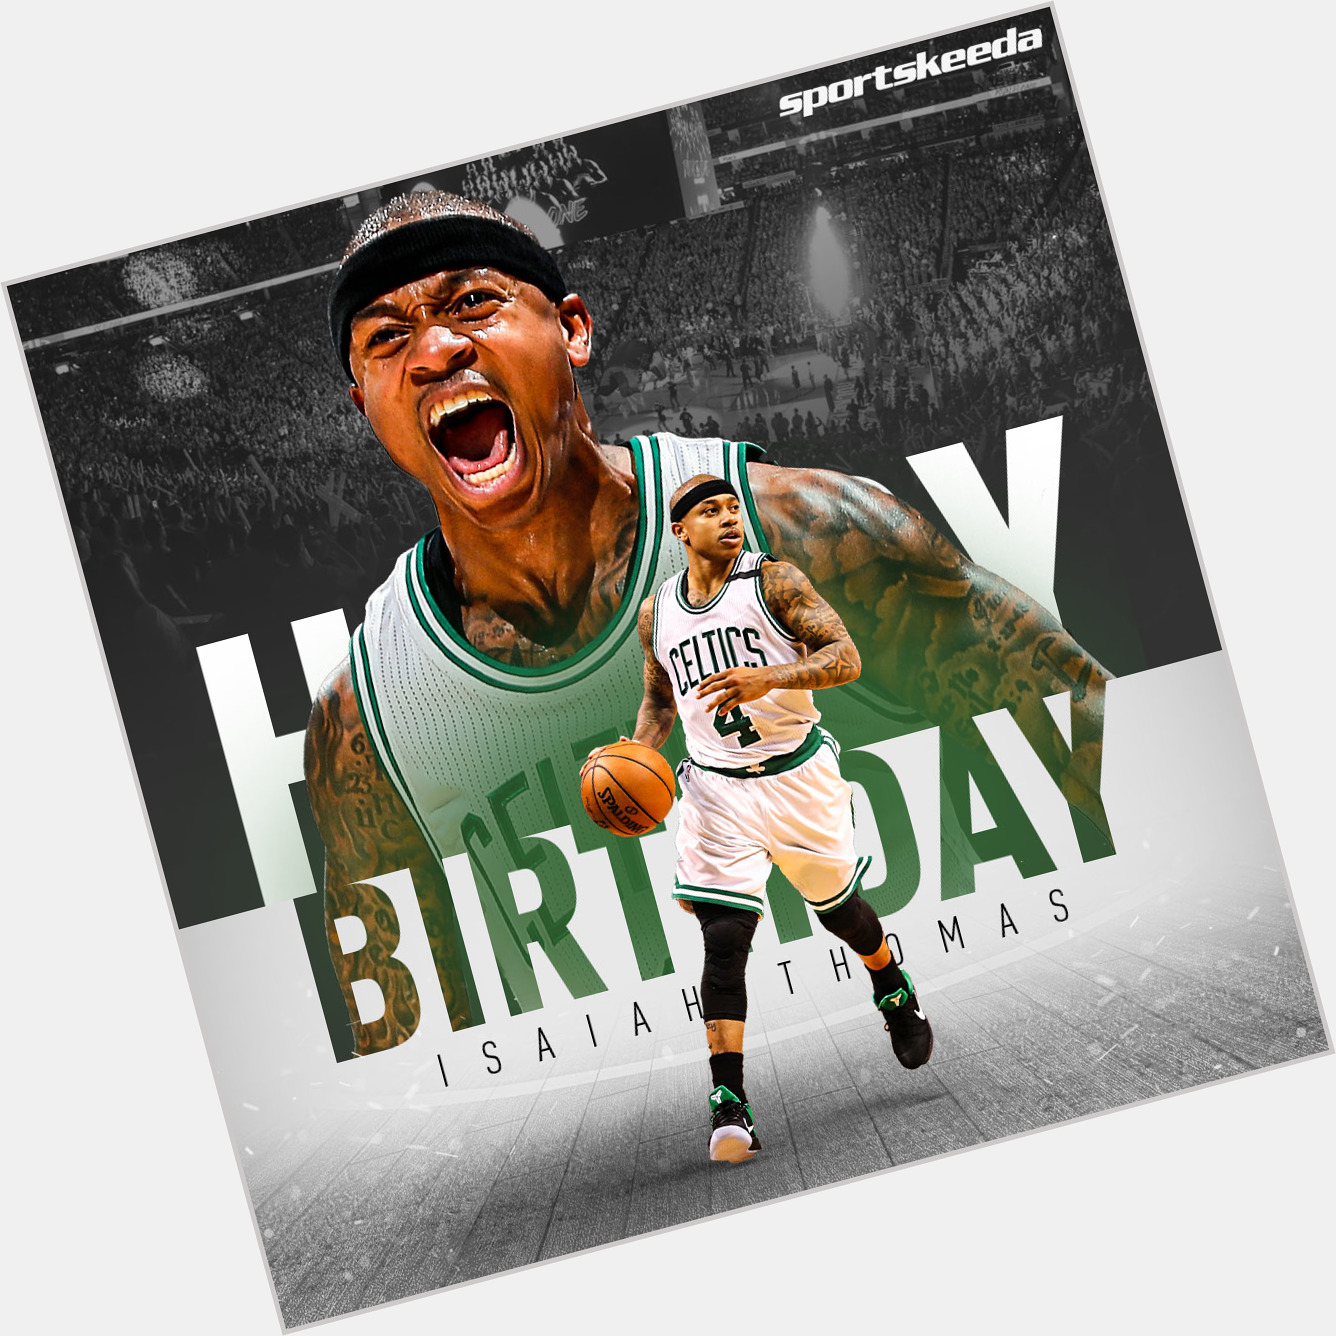 Join us in wishing a Happy 34th Birthday to Isaiah Thomas!  